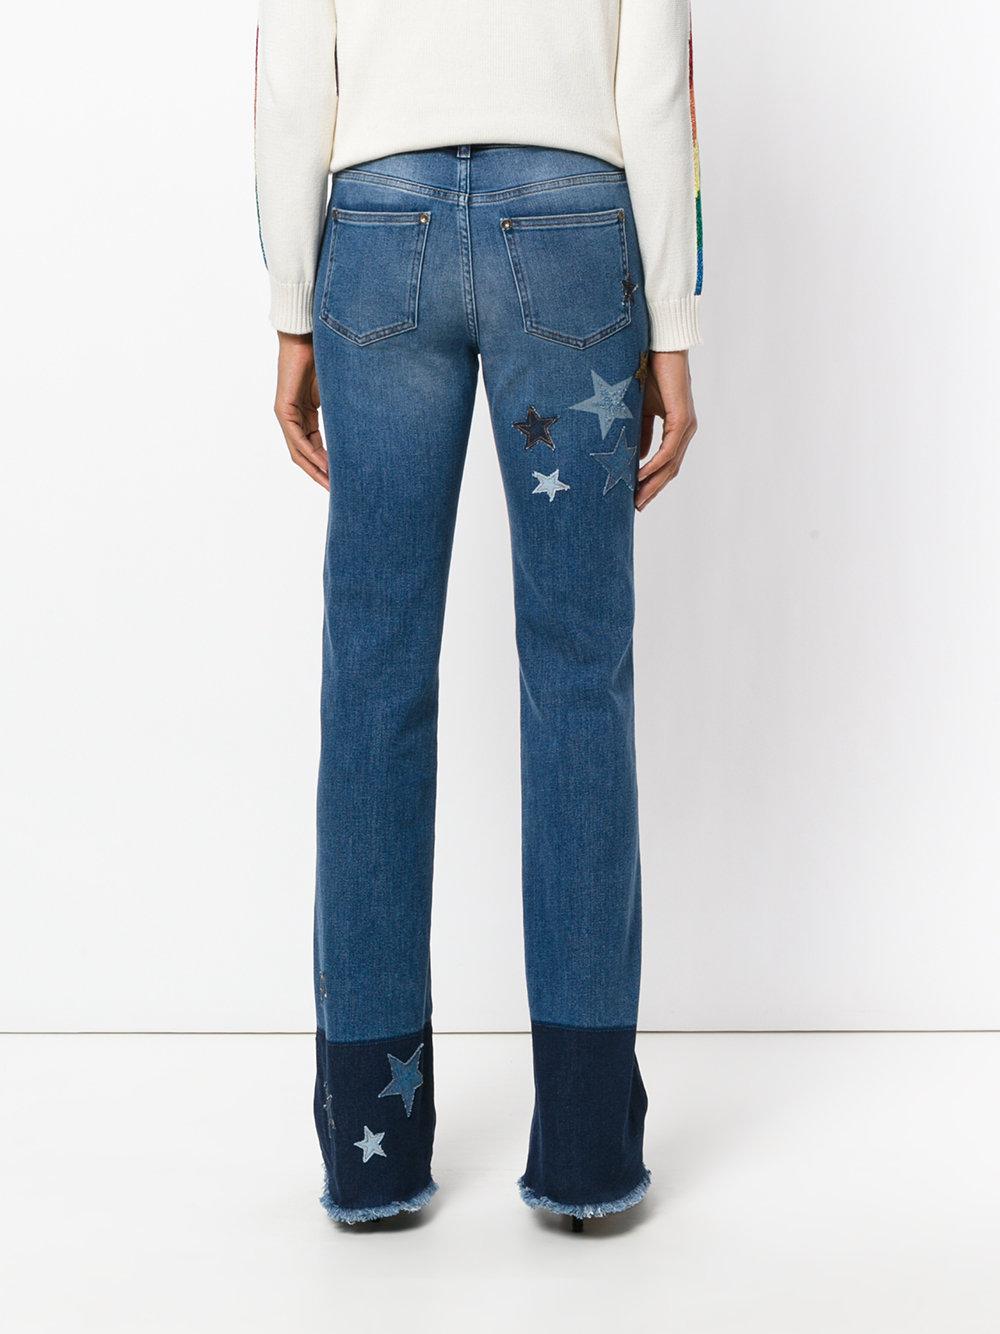 RED Valentino Denim Star Patch Flared Jeans in Blue - Lyst